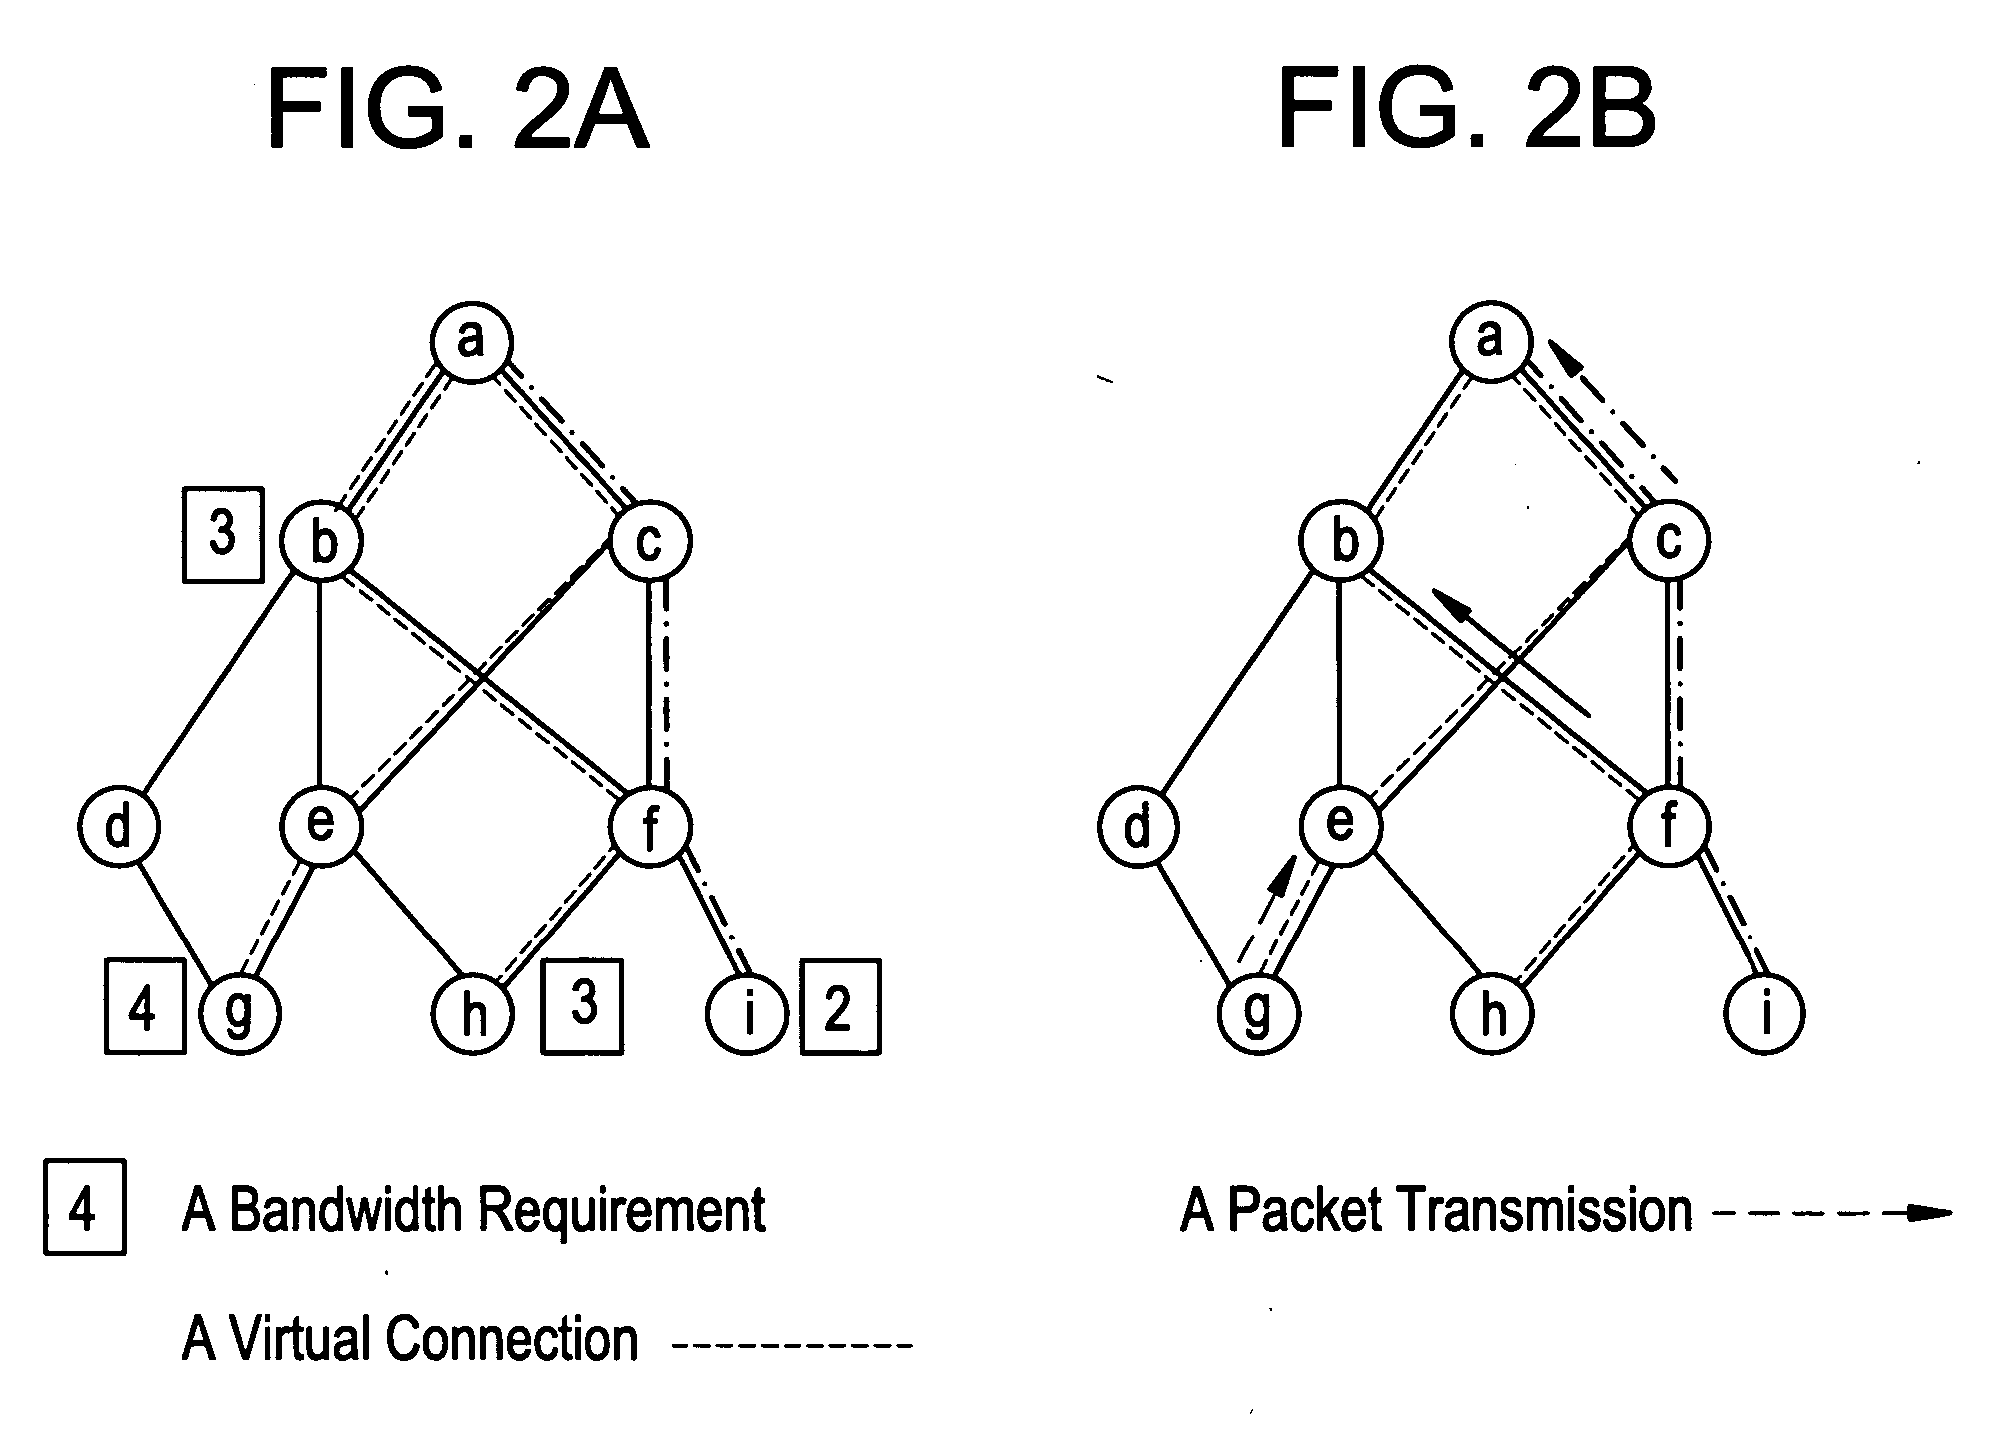 Methods and devices for scheduling the transmission of packets in configurable access wireless networks that provide Quality-of-Service guarantees